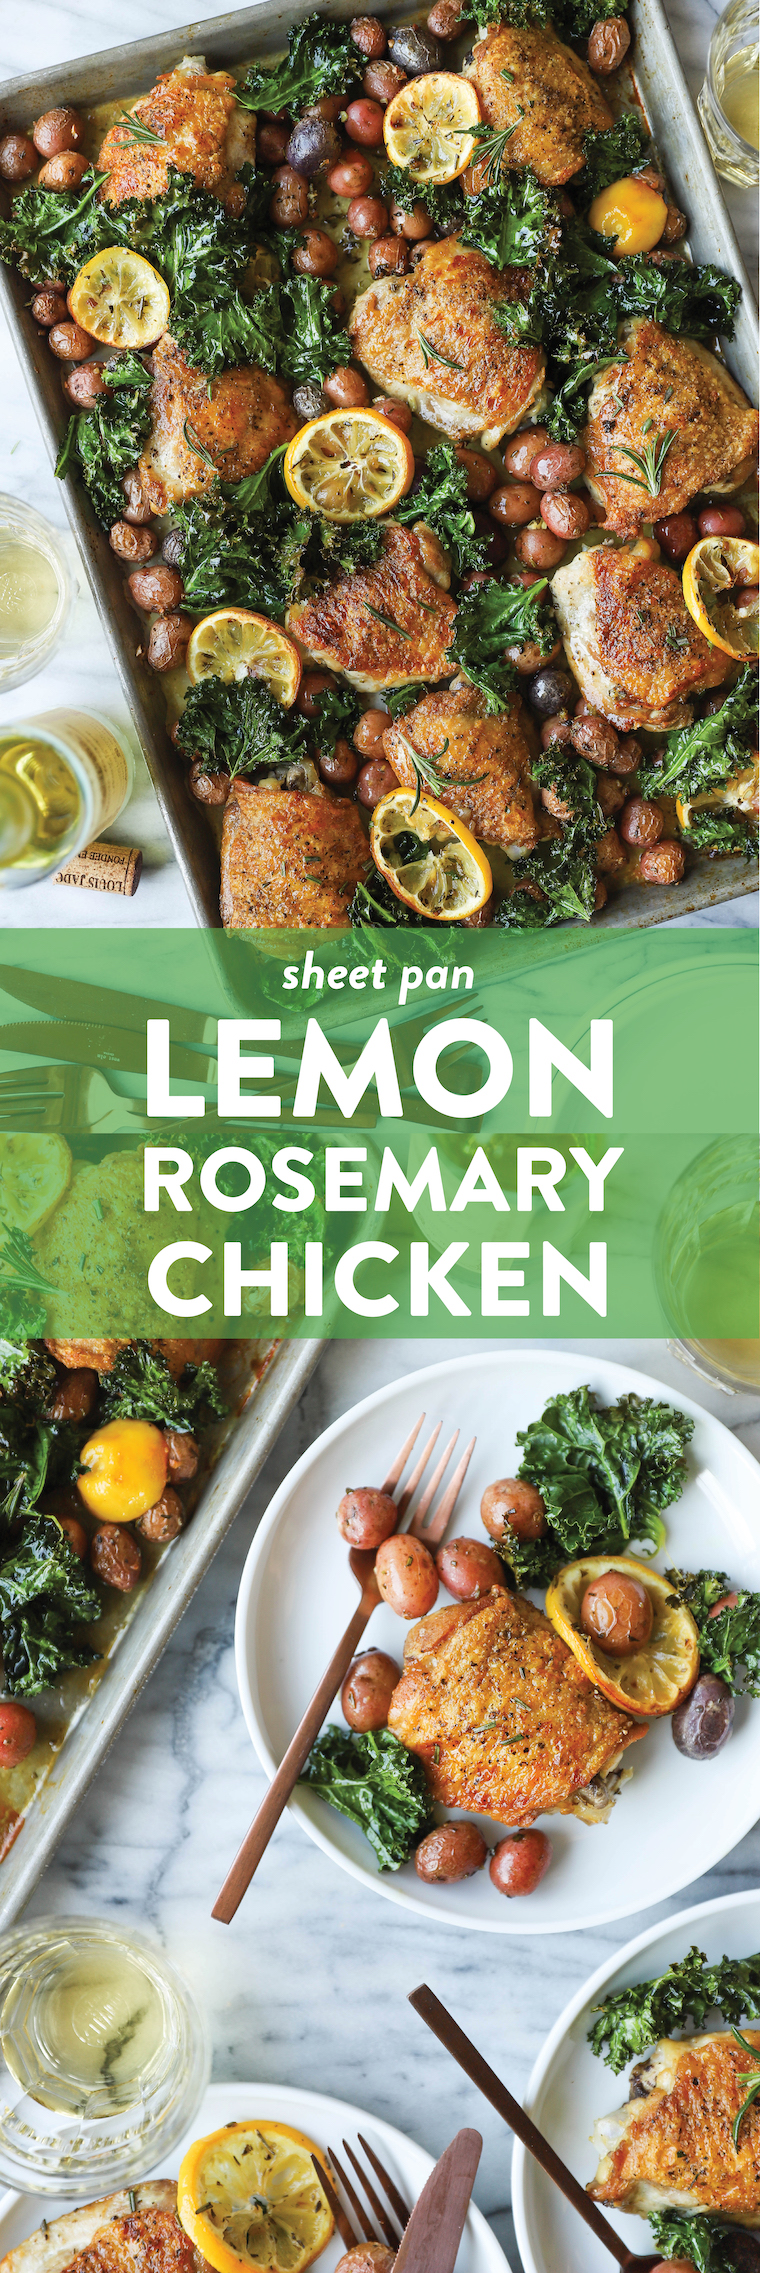 Sheet Pan Lemon Rosemary Chicken - SHEET PAN DINNER! Crispy, juicy chicken thighs with tender baby potatoes and crisped kale. So hearty, so good, so easy!